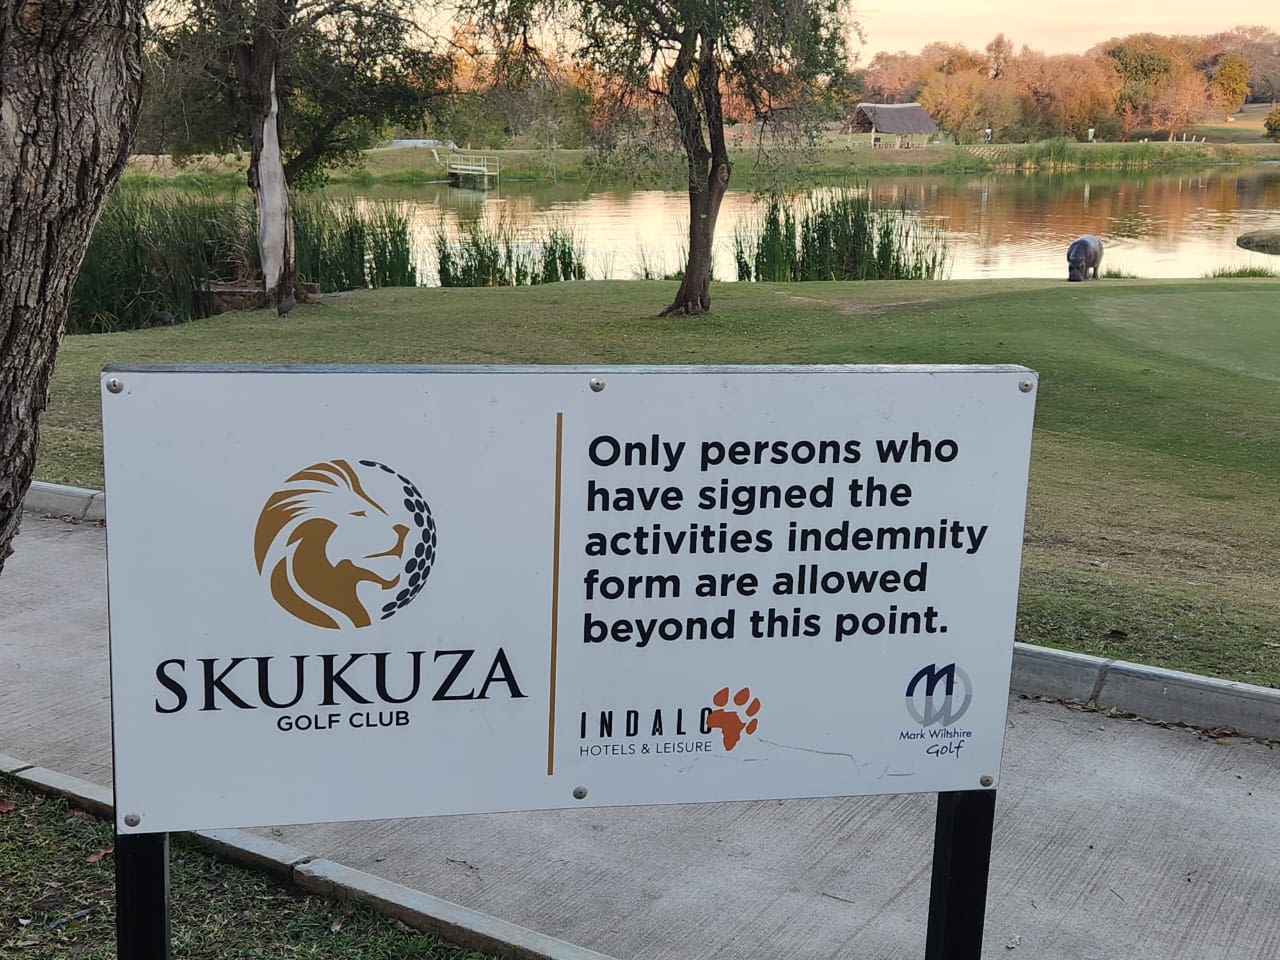 Players must sign an indemnity form before starting Skukuza.